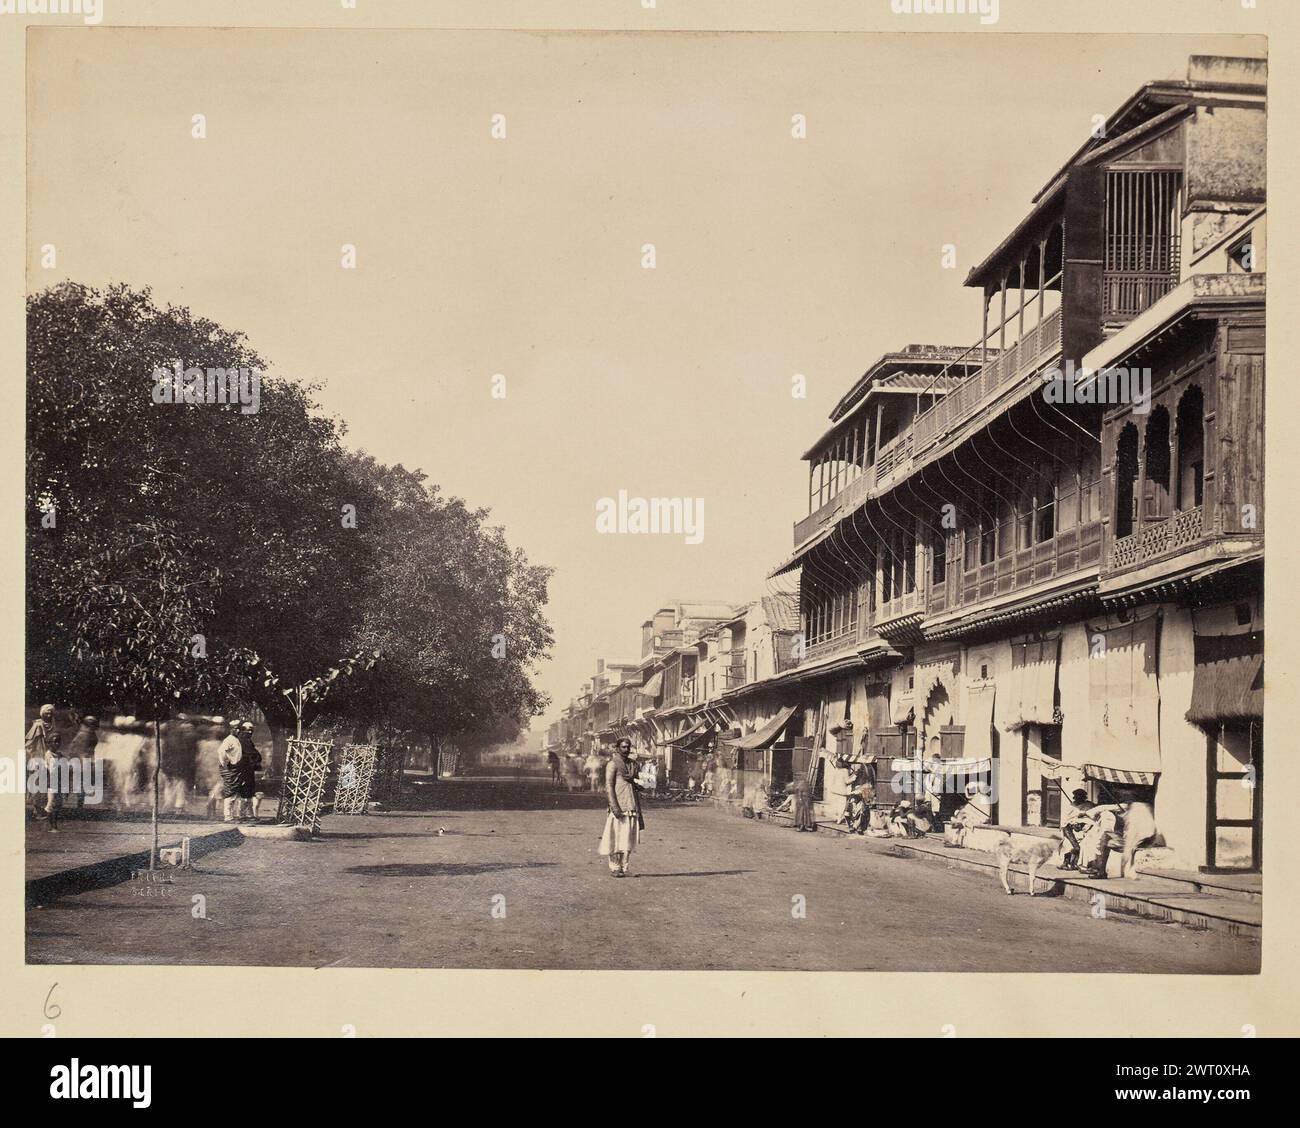 Calcutta street view. Francis Frith & Co., photographer 1850s–1890s View down a street in Calcutta. The street is lined on one side with various shops, and a row of trees on the other. A man stands in the middle of the street looking towards the camera as pedestrians, shopkeepers, and animals move about around him. (Recto, mount) lower left, below print, handwritten in pencil: '6' Stock Photo